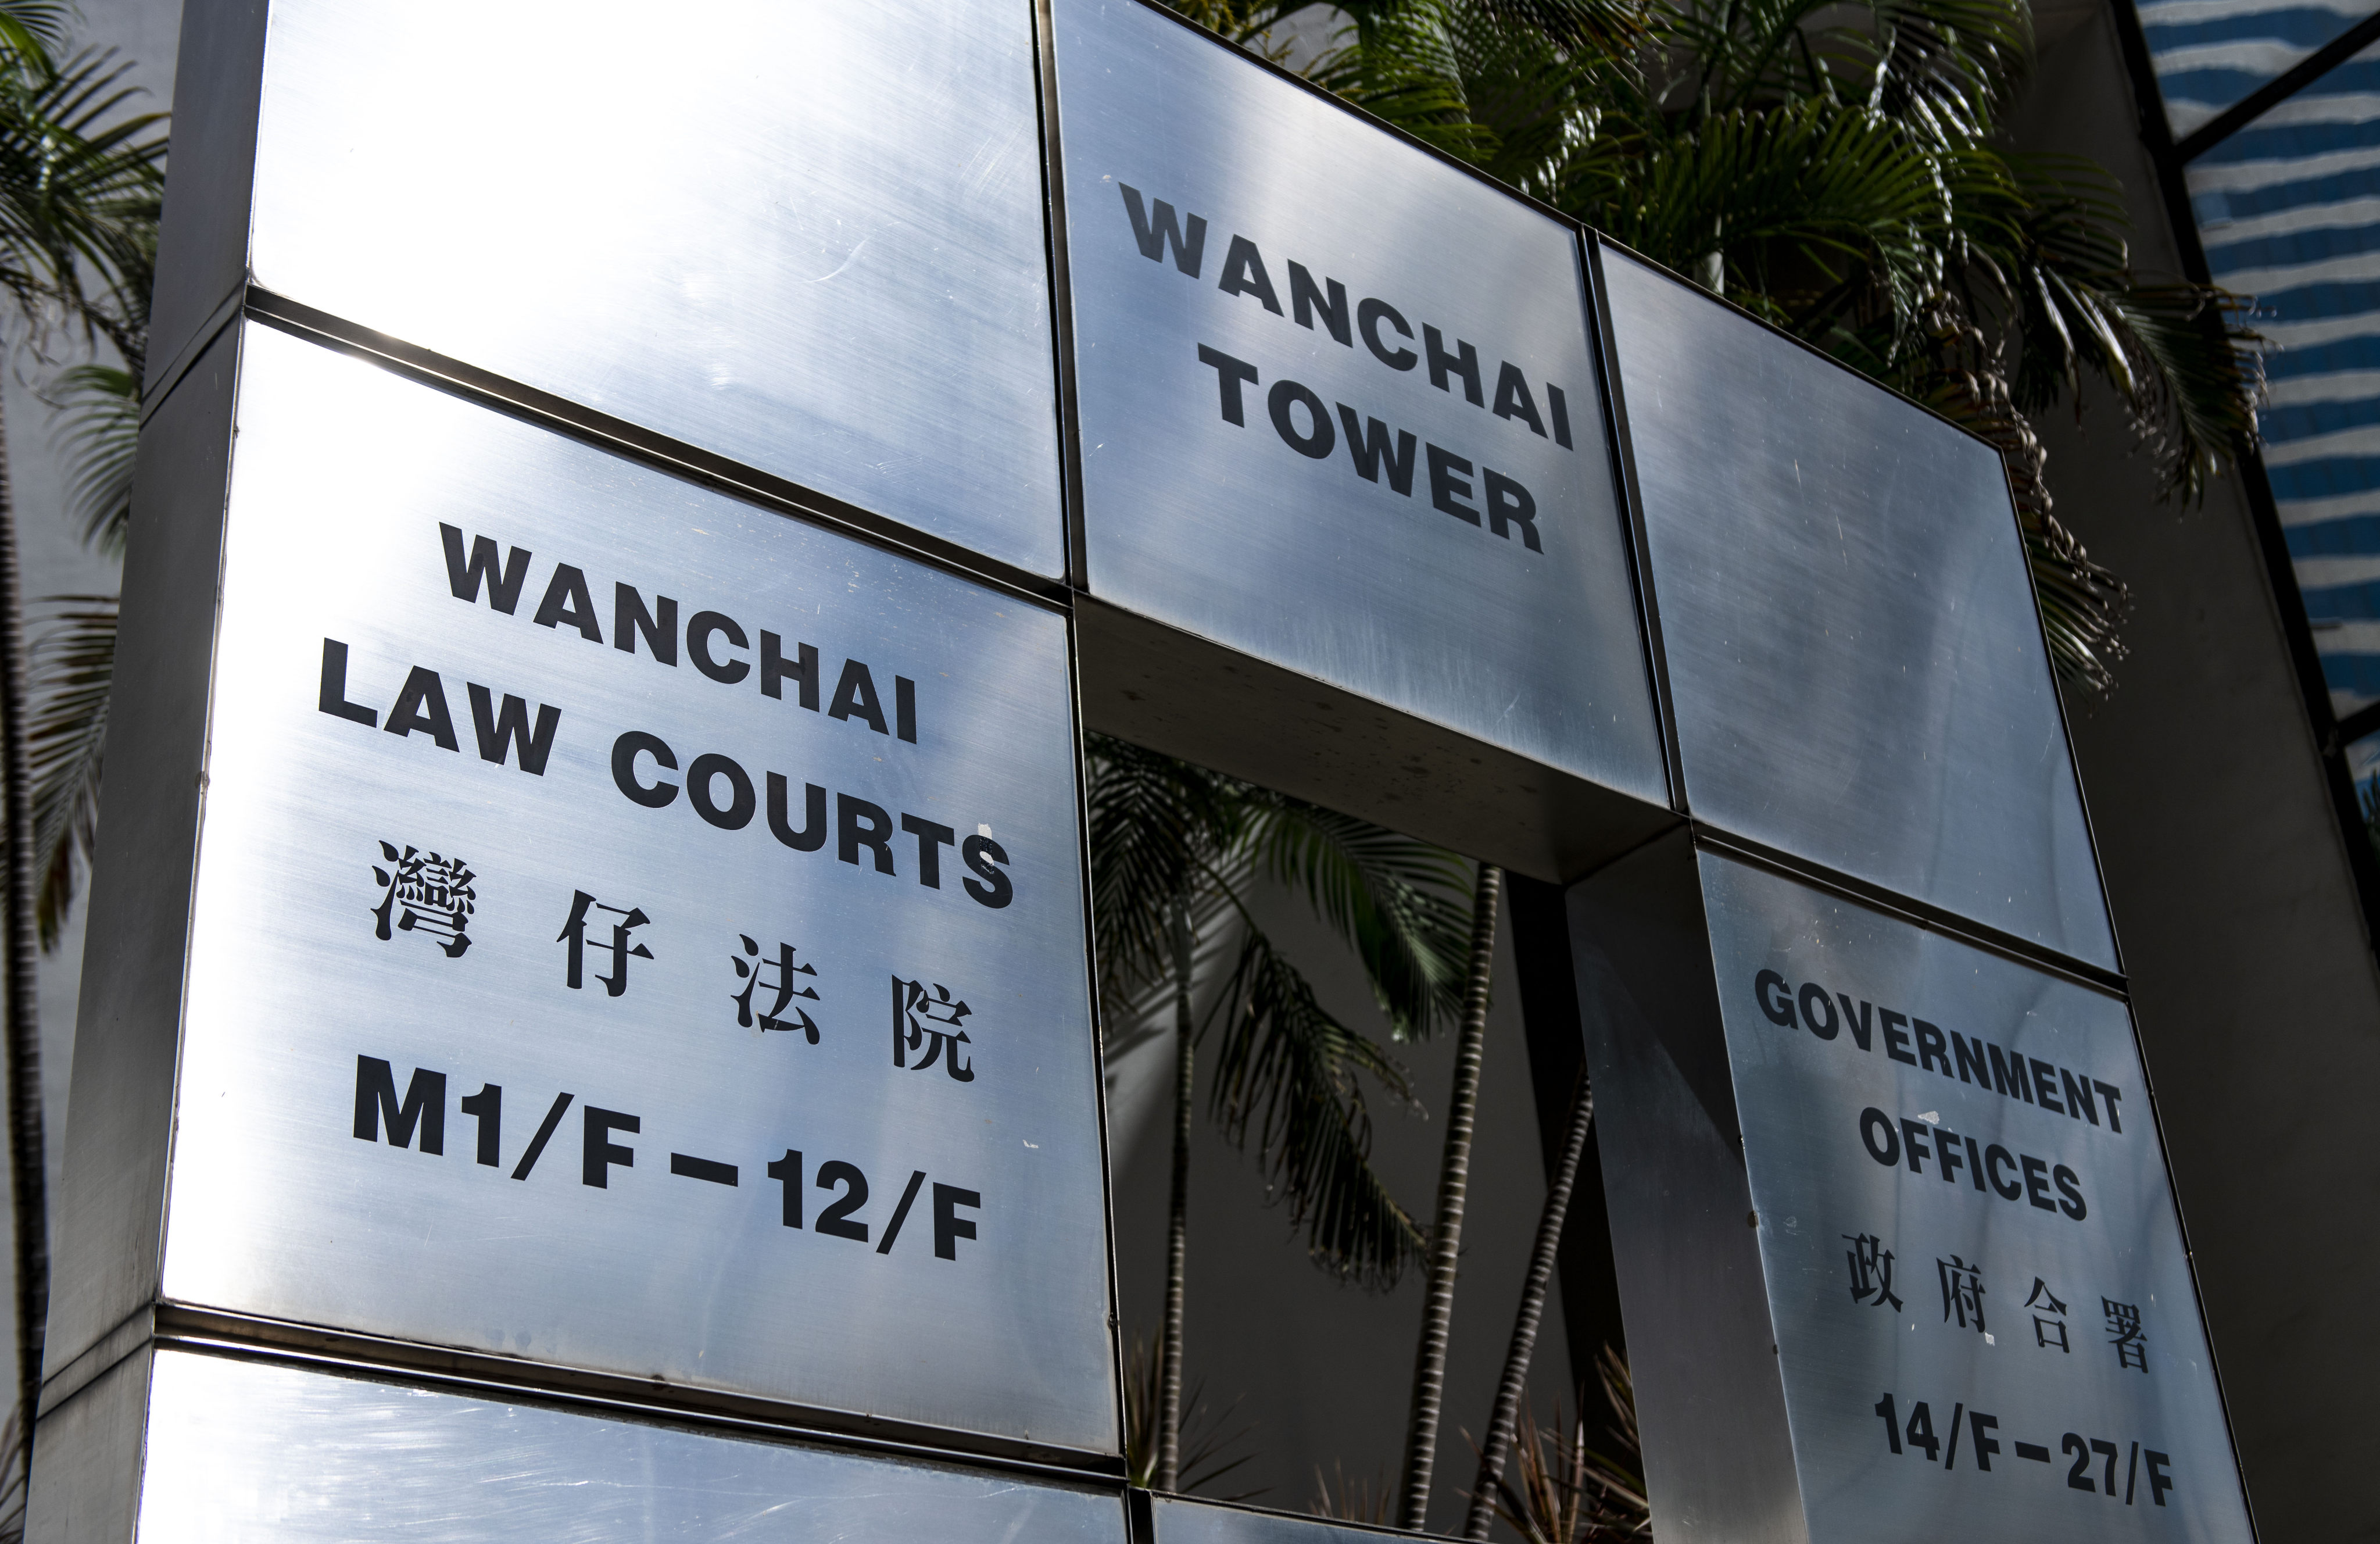 The case is being heard at the city’s District Court in Wan Chai. Photo: Warton Li
